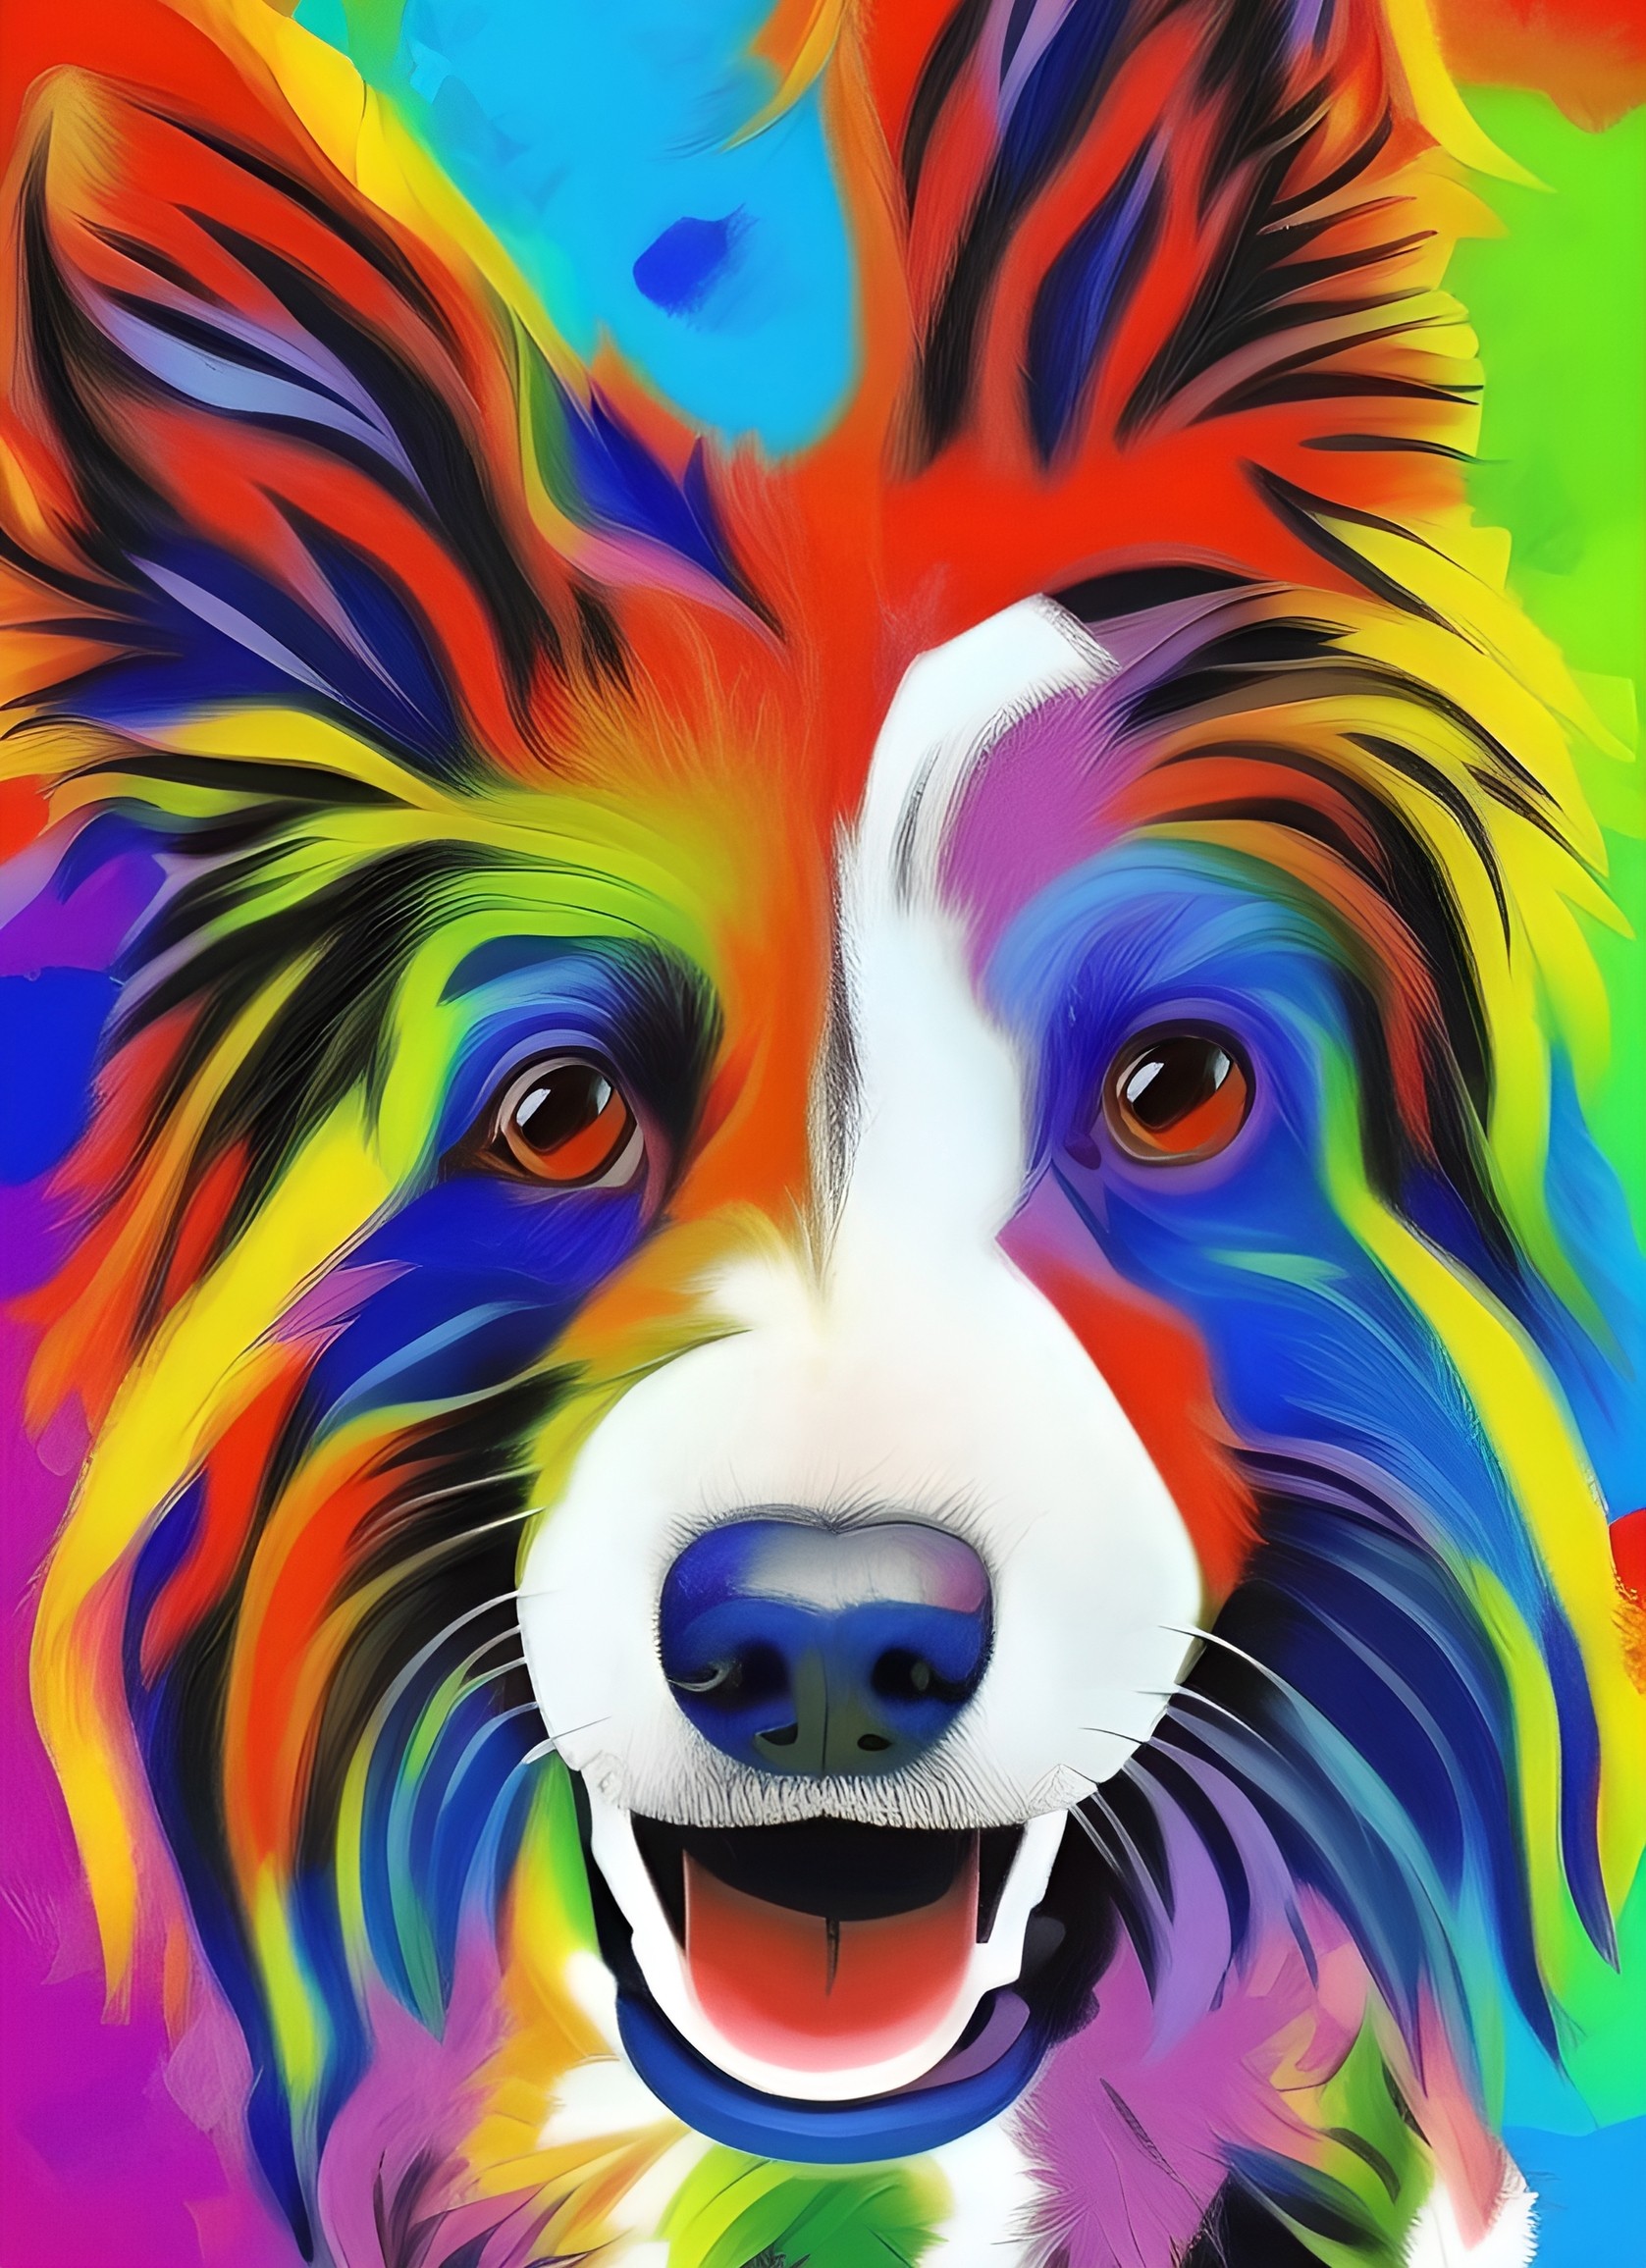 Border Collie Dog Colourful Abstract Art Blank Greeting Card